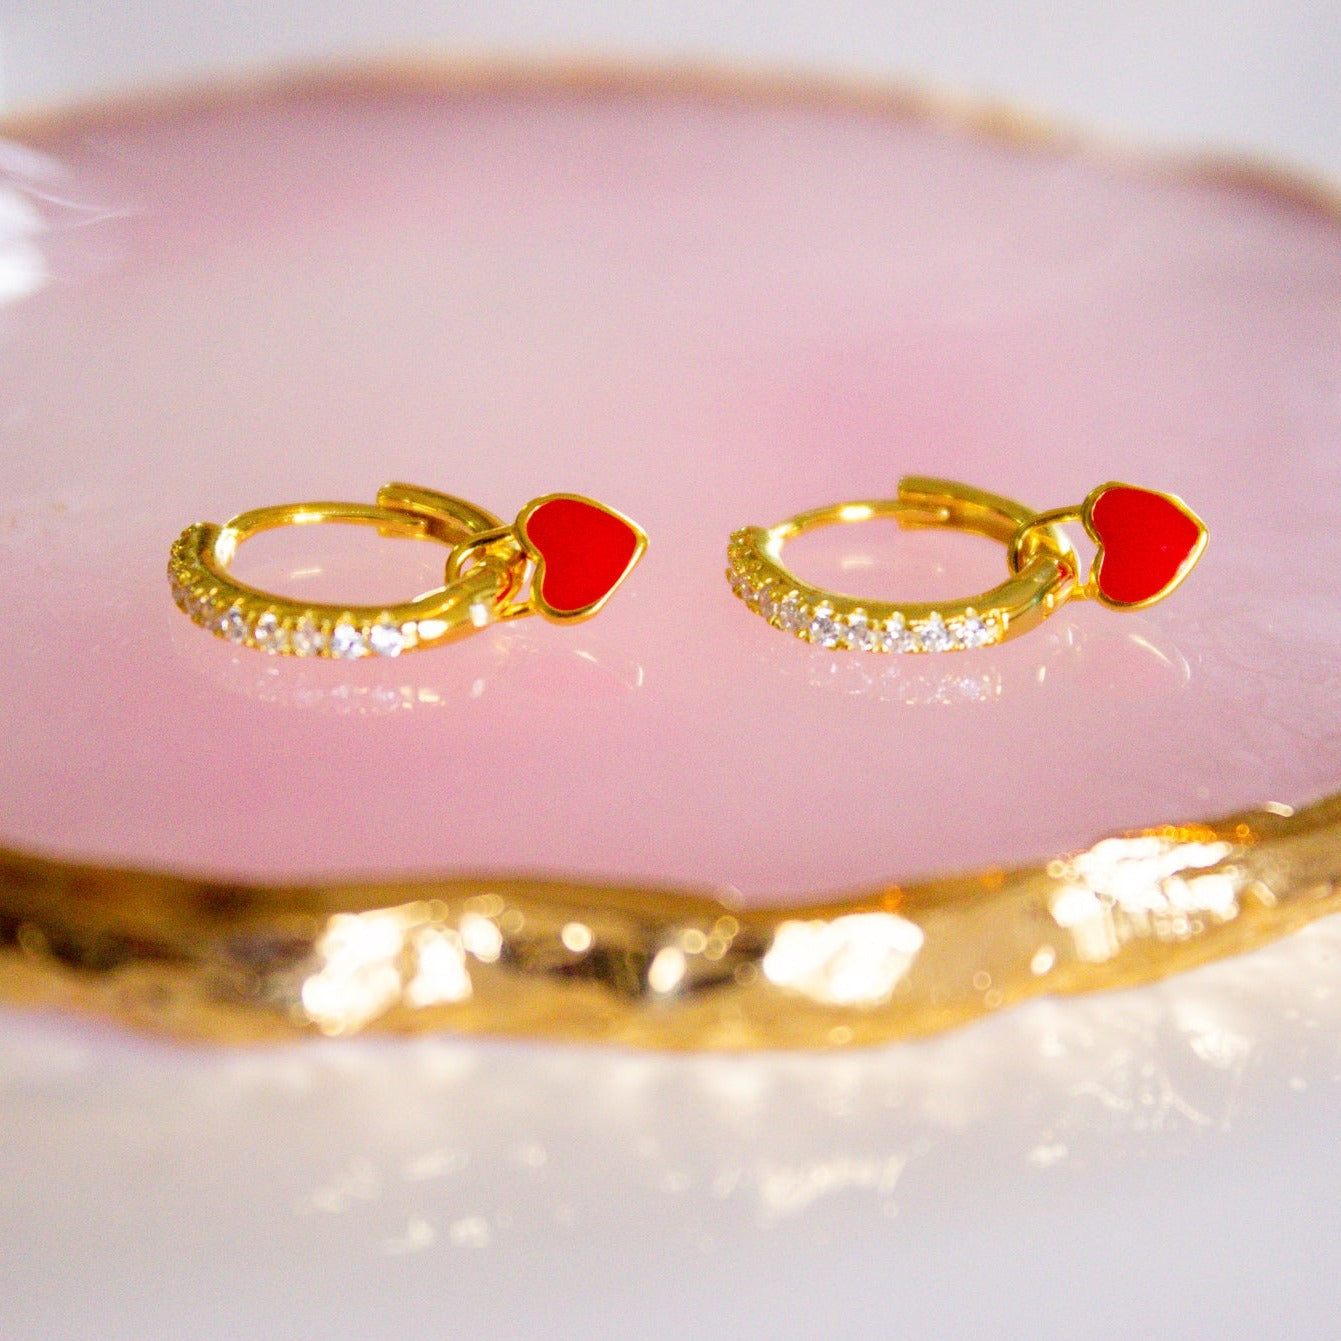 gold hoops with red heart charms